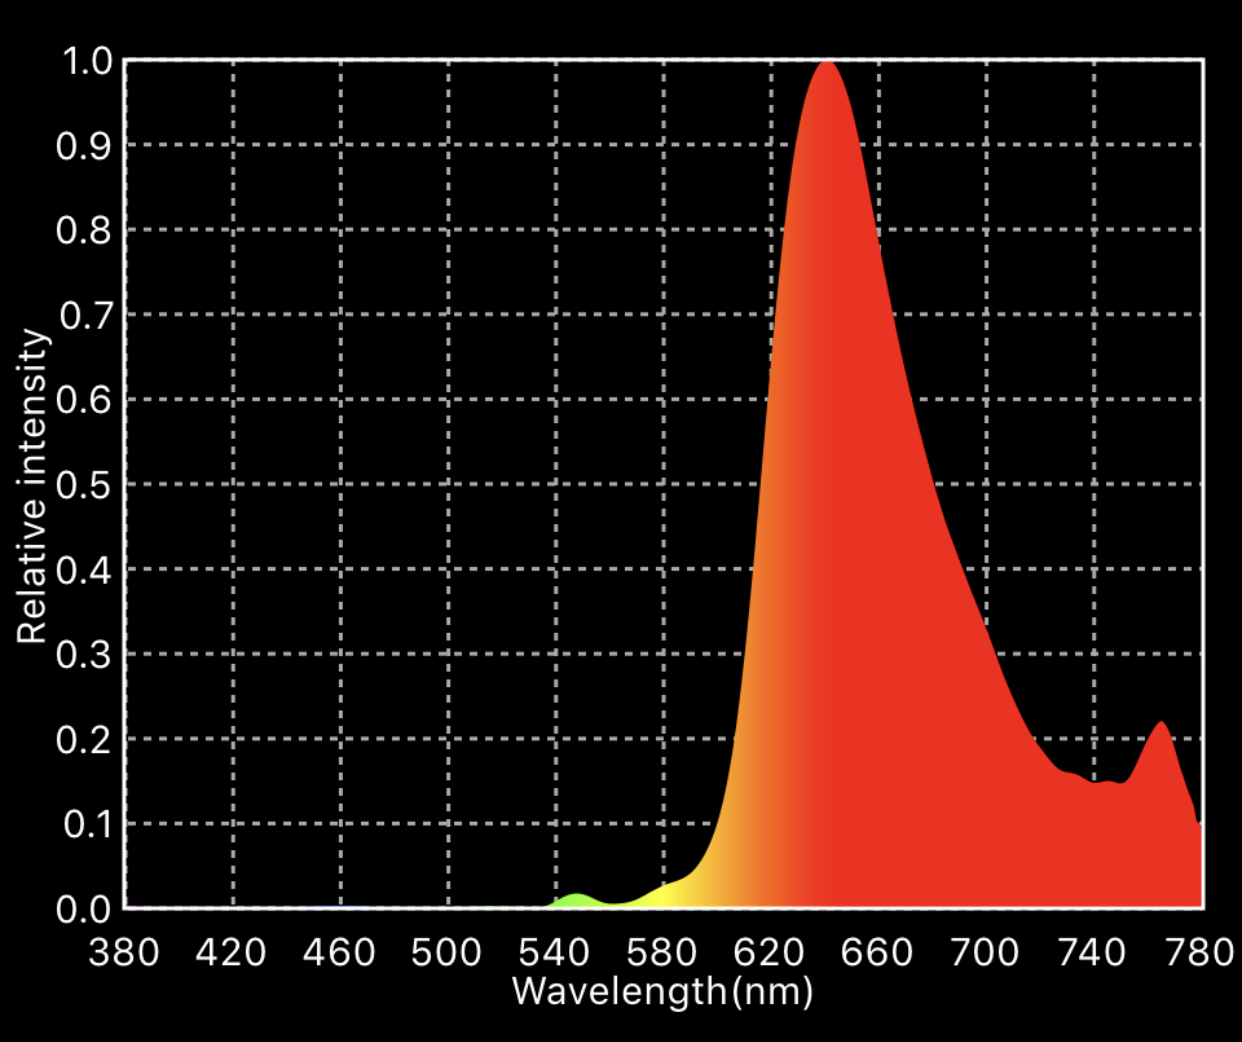  Spectral power distribution (SPD) curve for a “ruby red” gas-discharge tube that contains neon gas. 